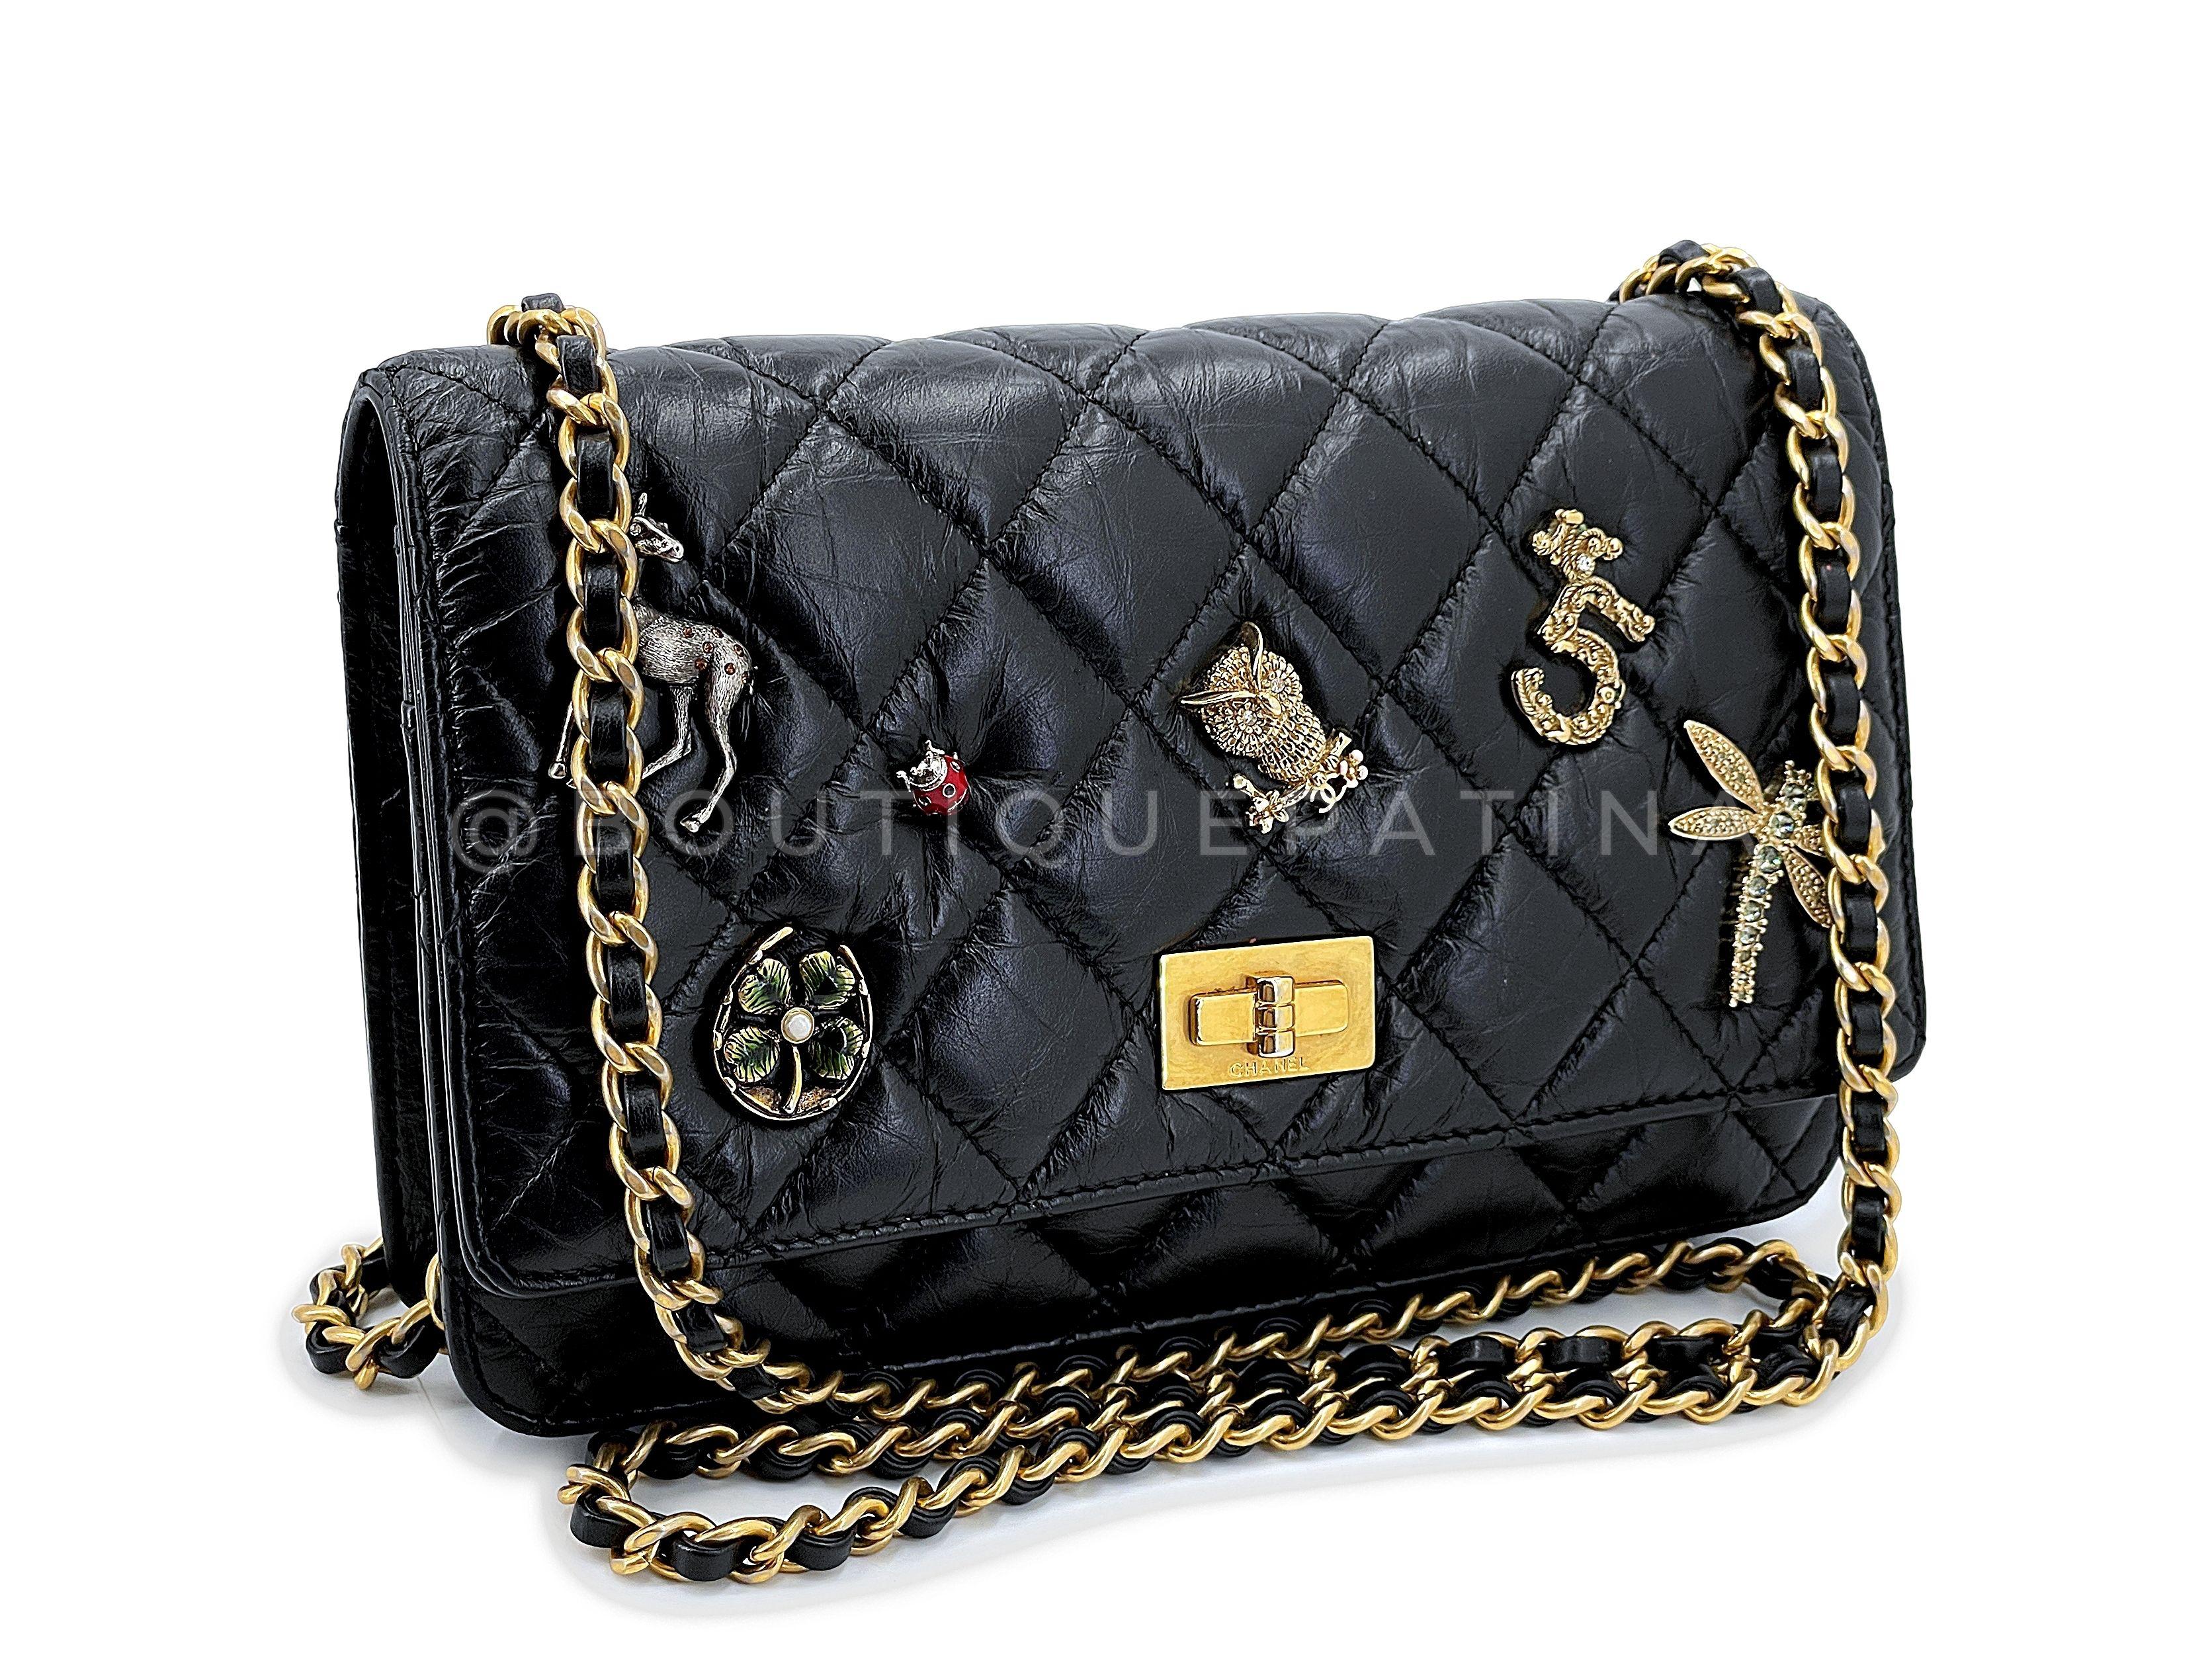 Chanel Reissue Woc - For Sale on 1stDibs  chanel 2.55 woc, chanel wallet  on chain, chanel reissue woc so black